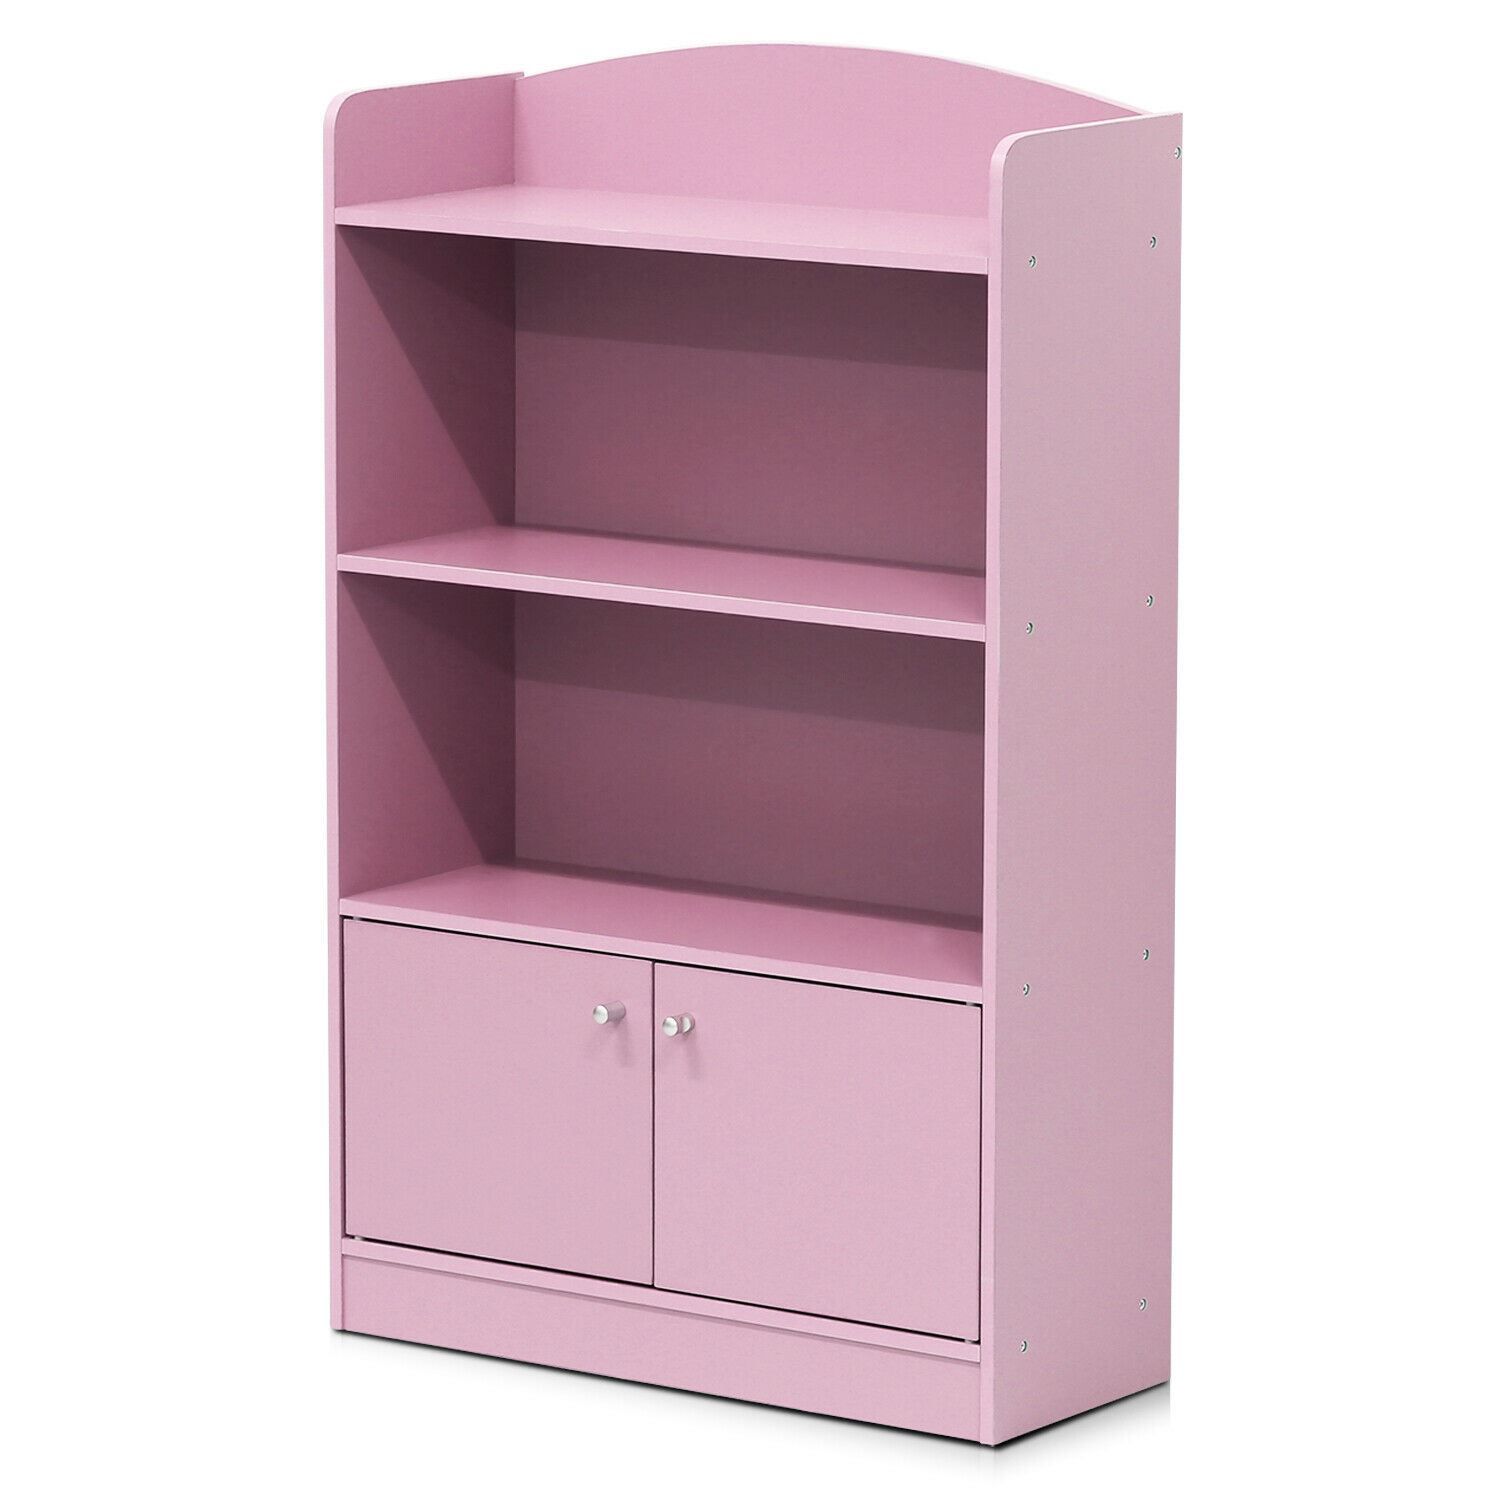 - Furinno KidKanac Bookshelf with Storage Cabinet great addition to any home or office.
- Fill it with favorite reads for a harmonious home library, or set it in the den to show off framed family photos. 
- Easy-clean laminate construction. 
- All the products are produced and packed 100% in Malaysia.